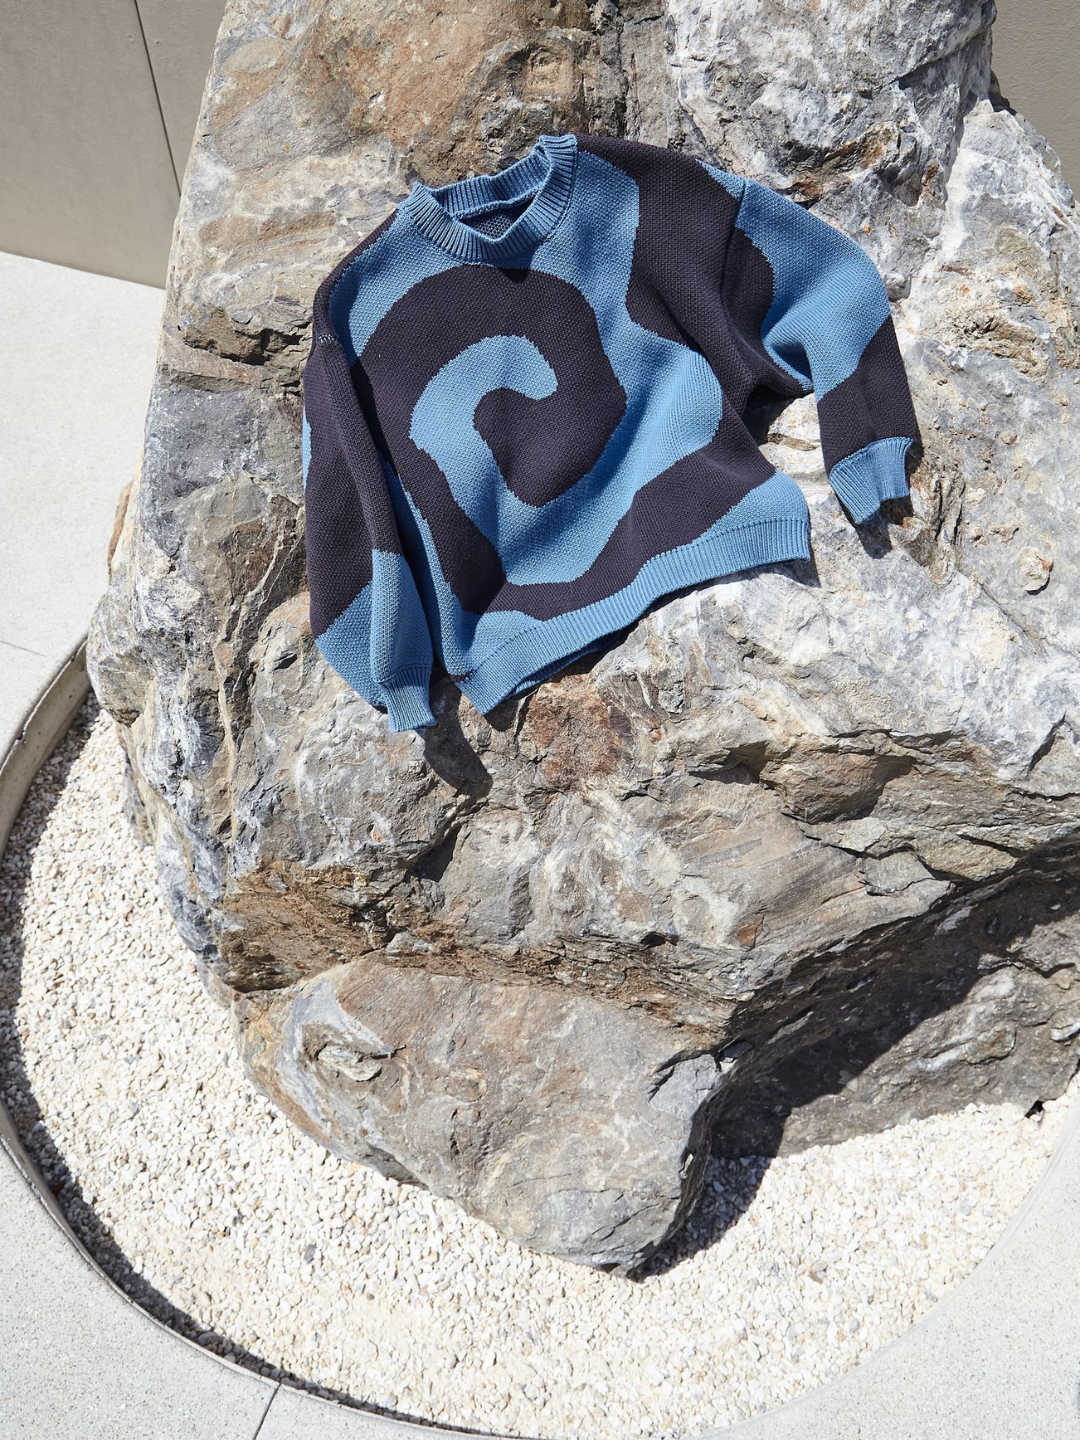 Slate | A kids crewneck sweater in medium blue, with a large single charcoal grey swirl design that covers the entire sweater, shown lying on a rock in a paved courtyard.